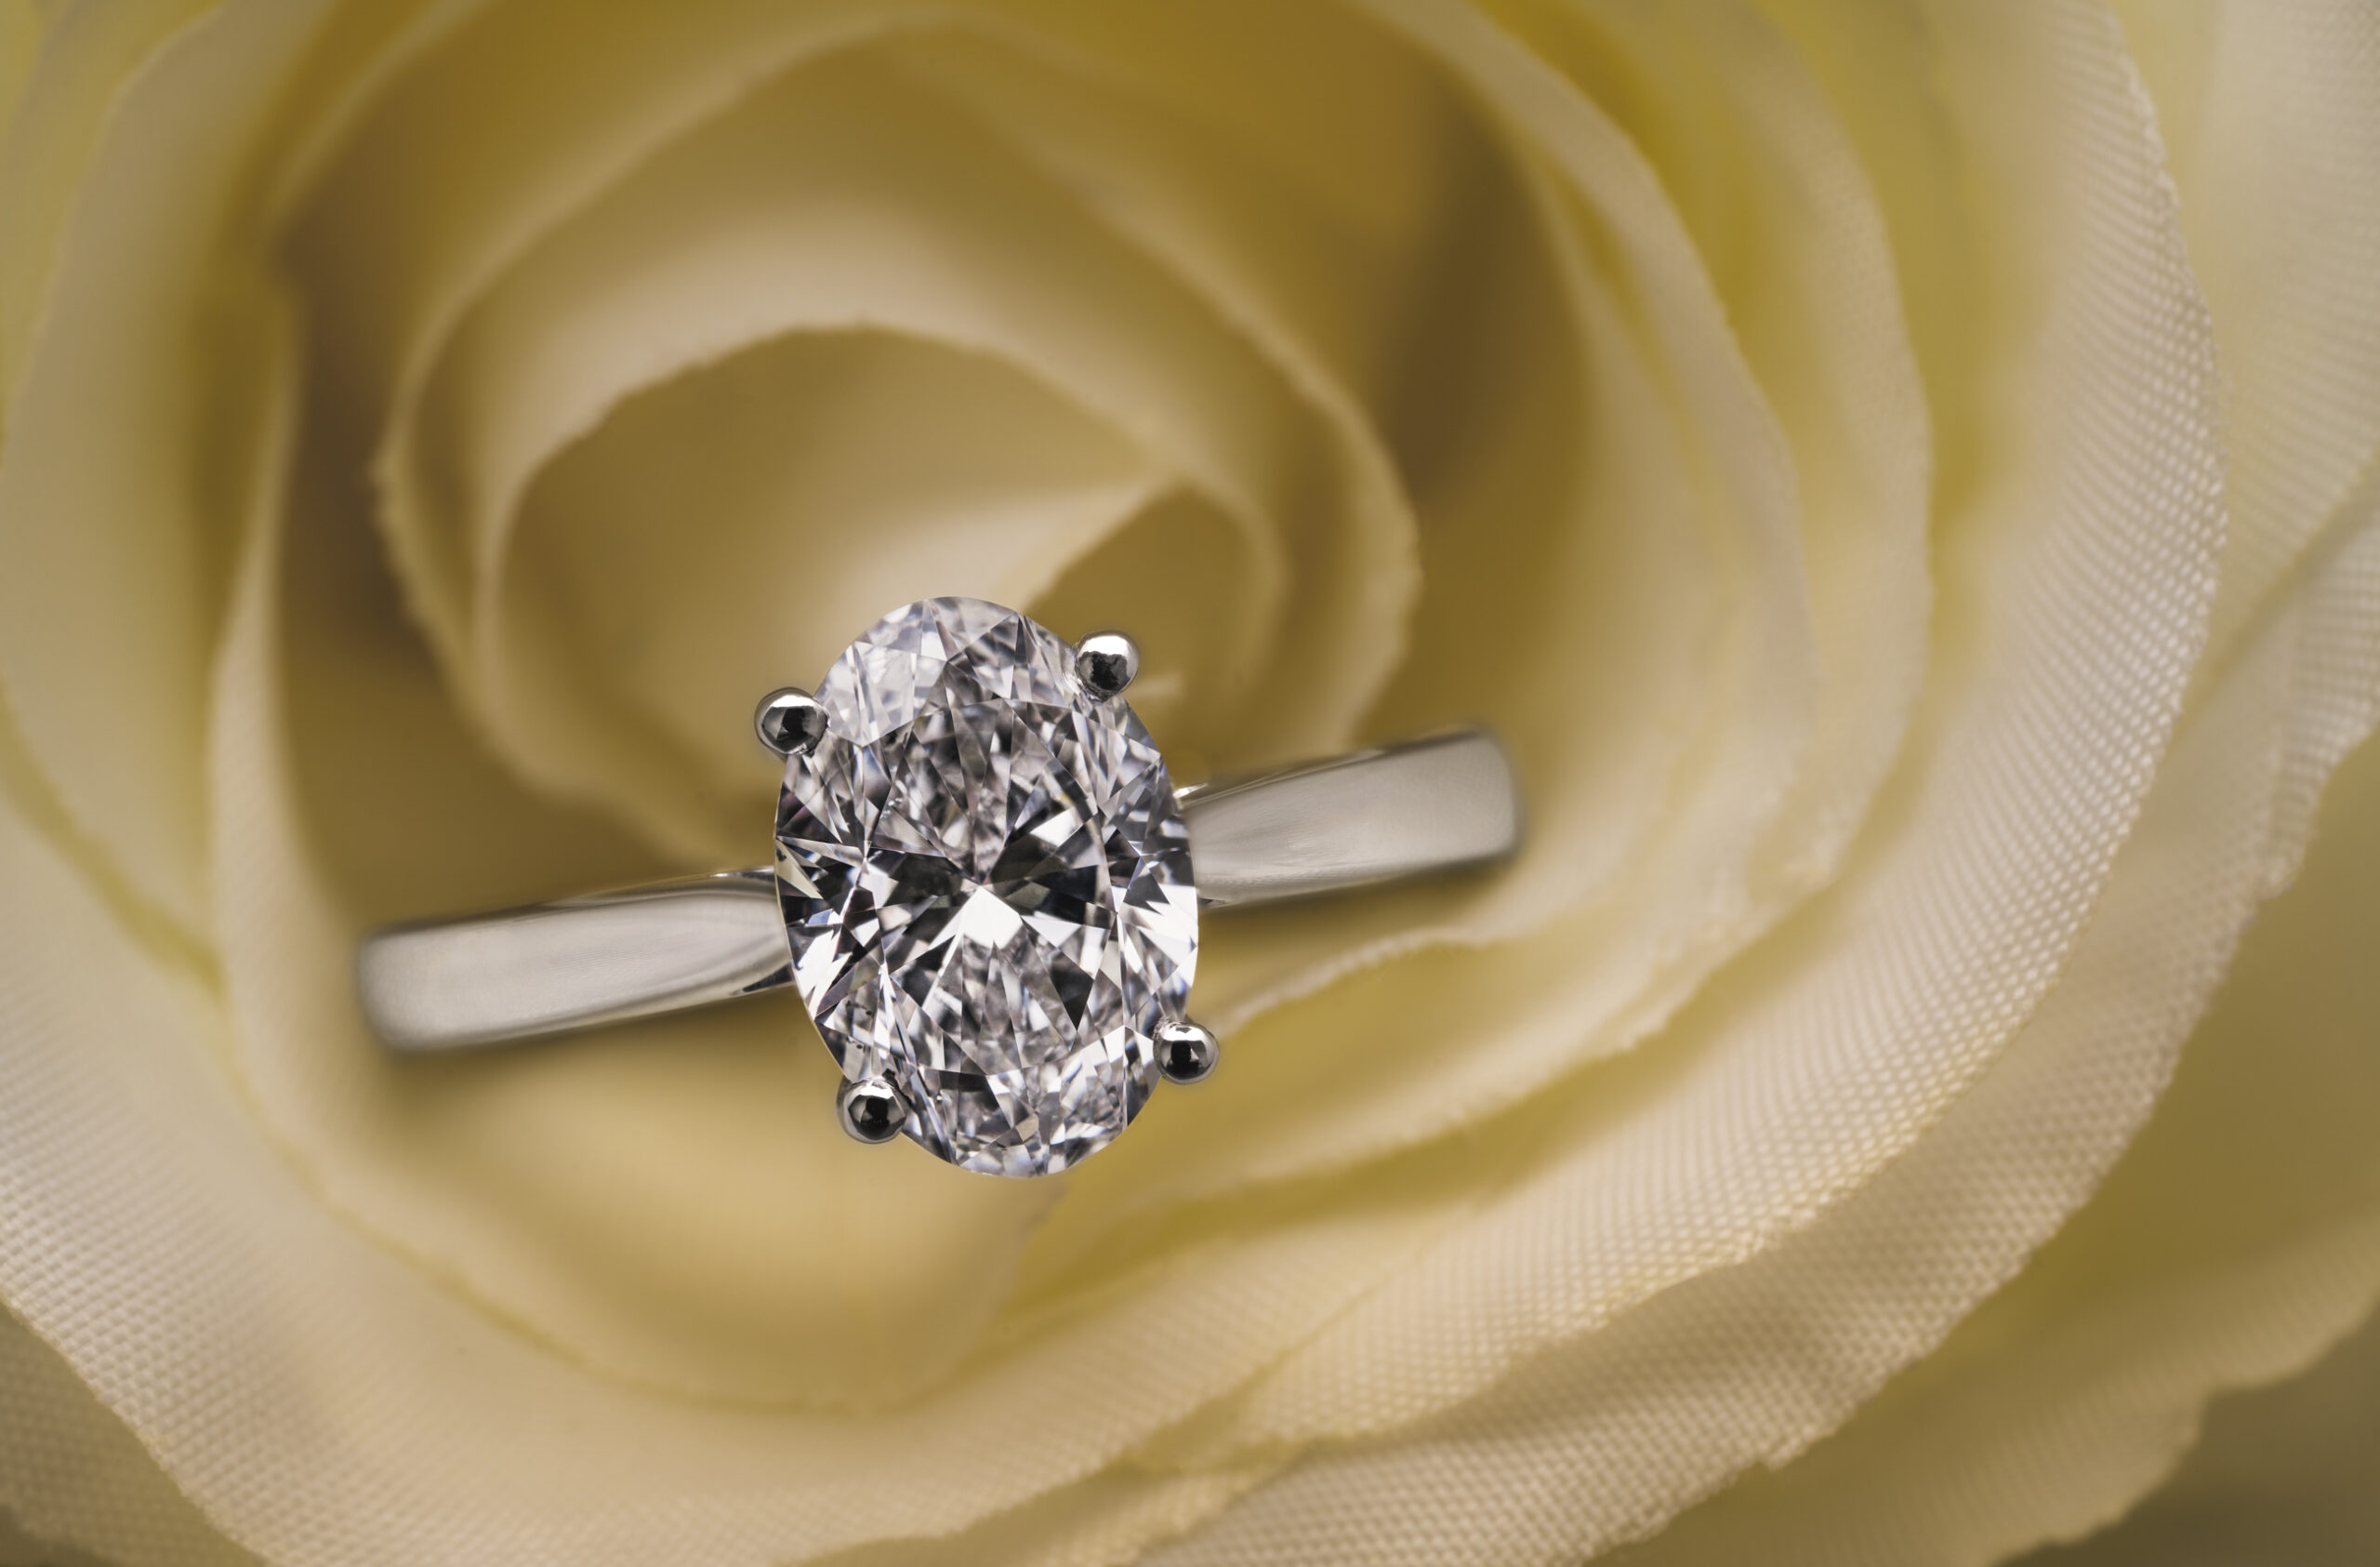 Choosing an Engagement Ring: How to Get it Right